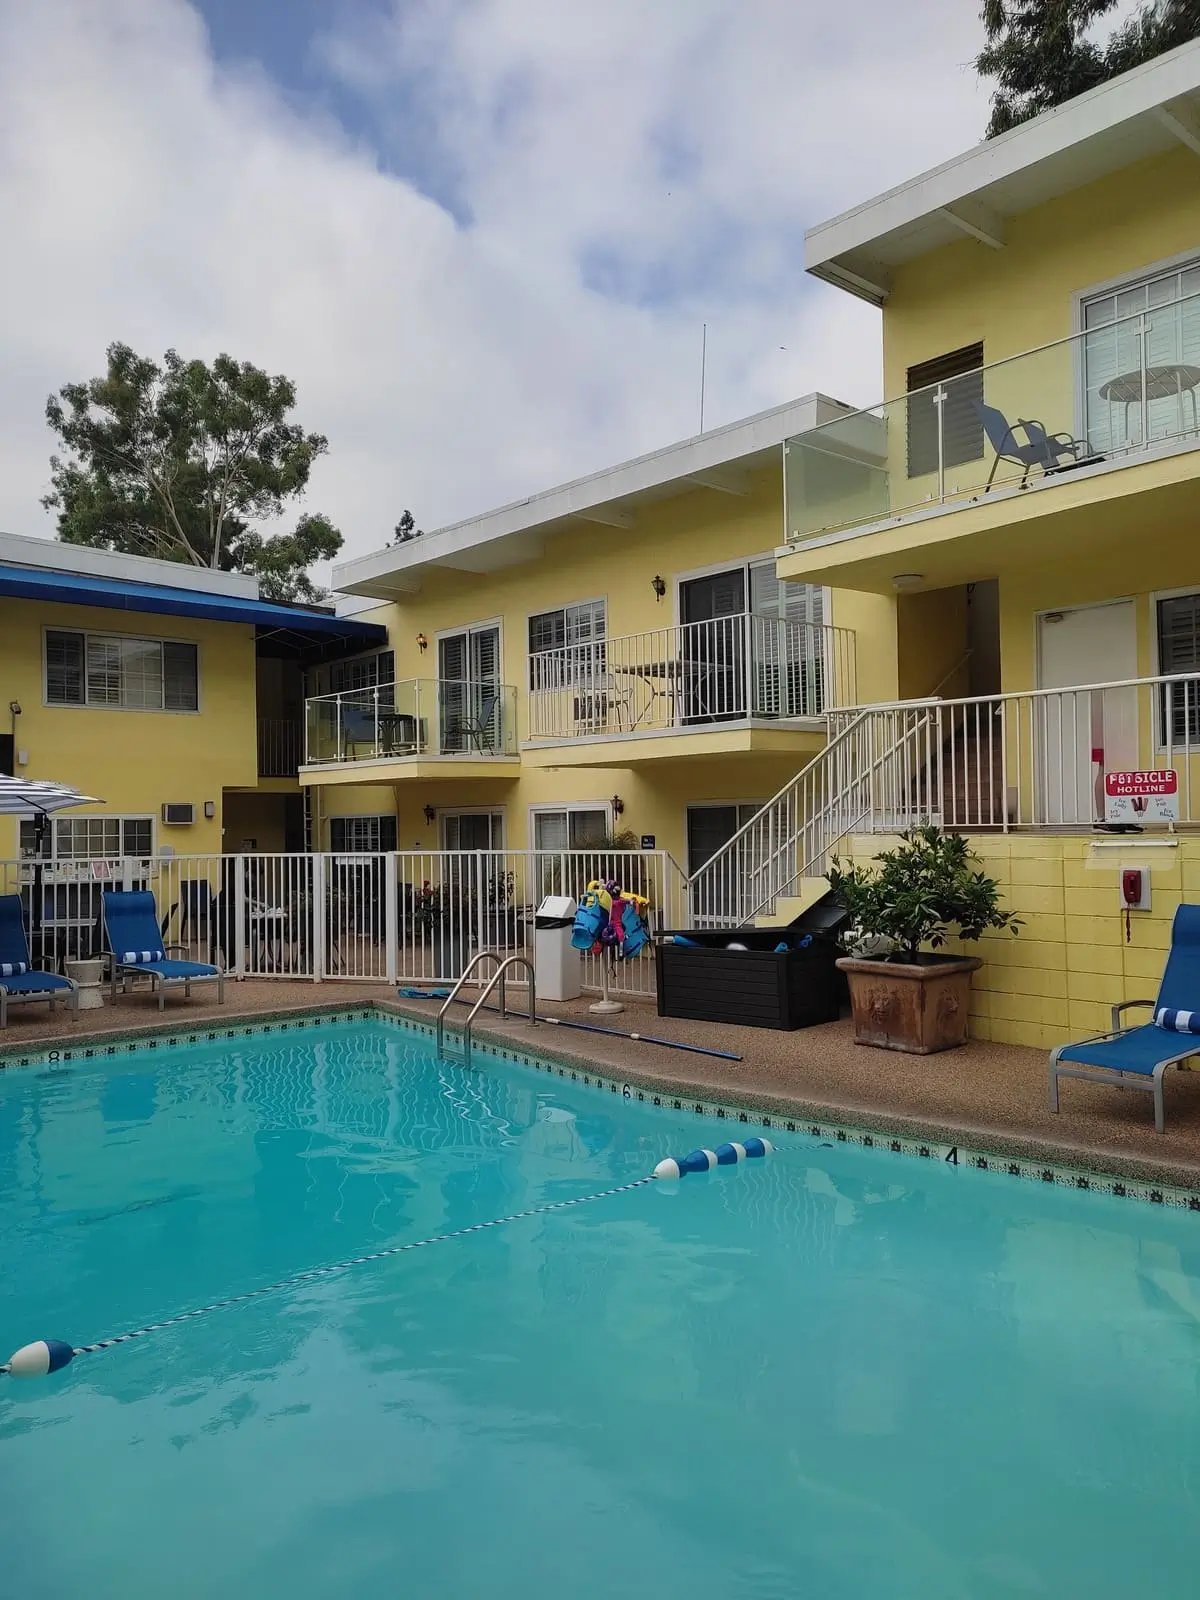 Small pool with sun loungers in courtyard of Magic Castle Hotel. The surrounding low-level apartment building is a bright yellow.